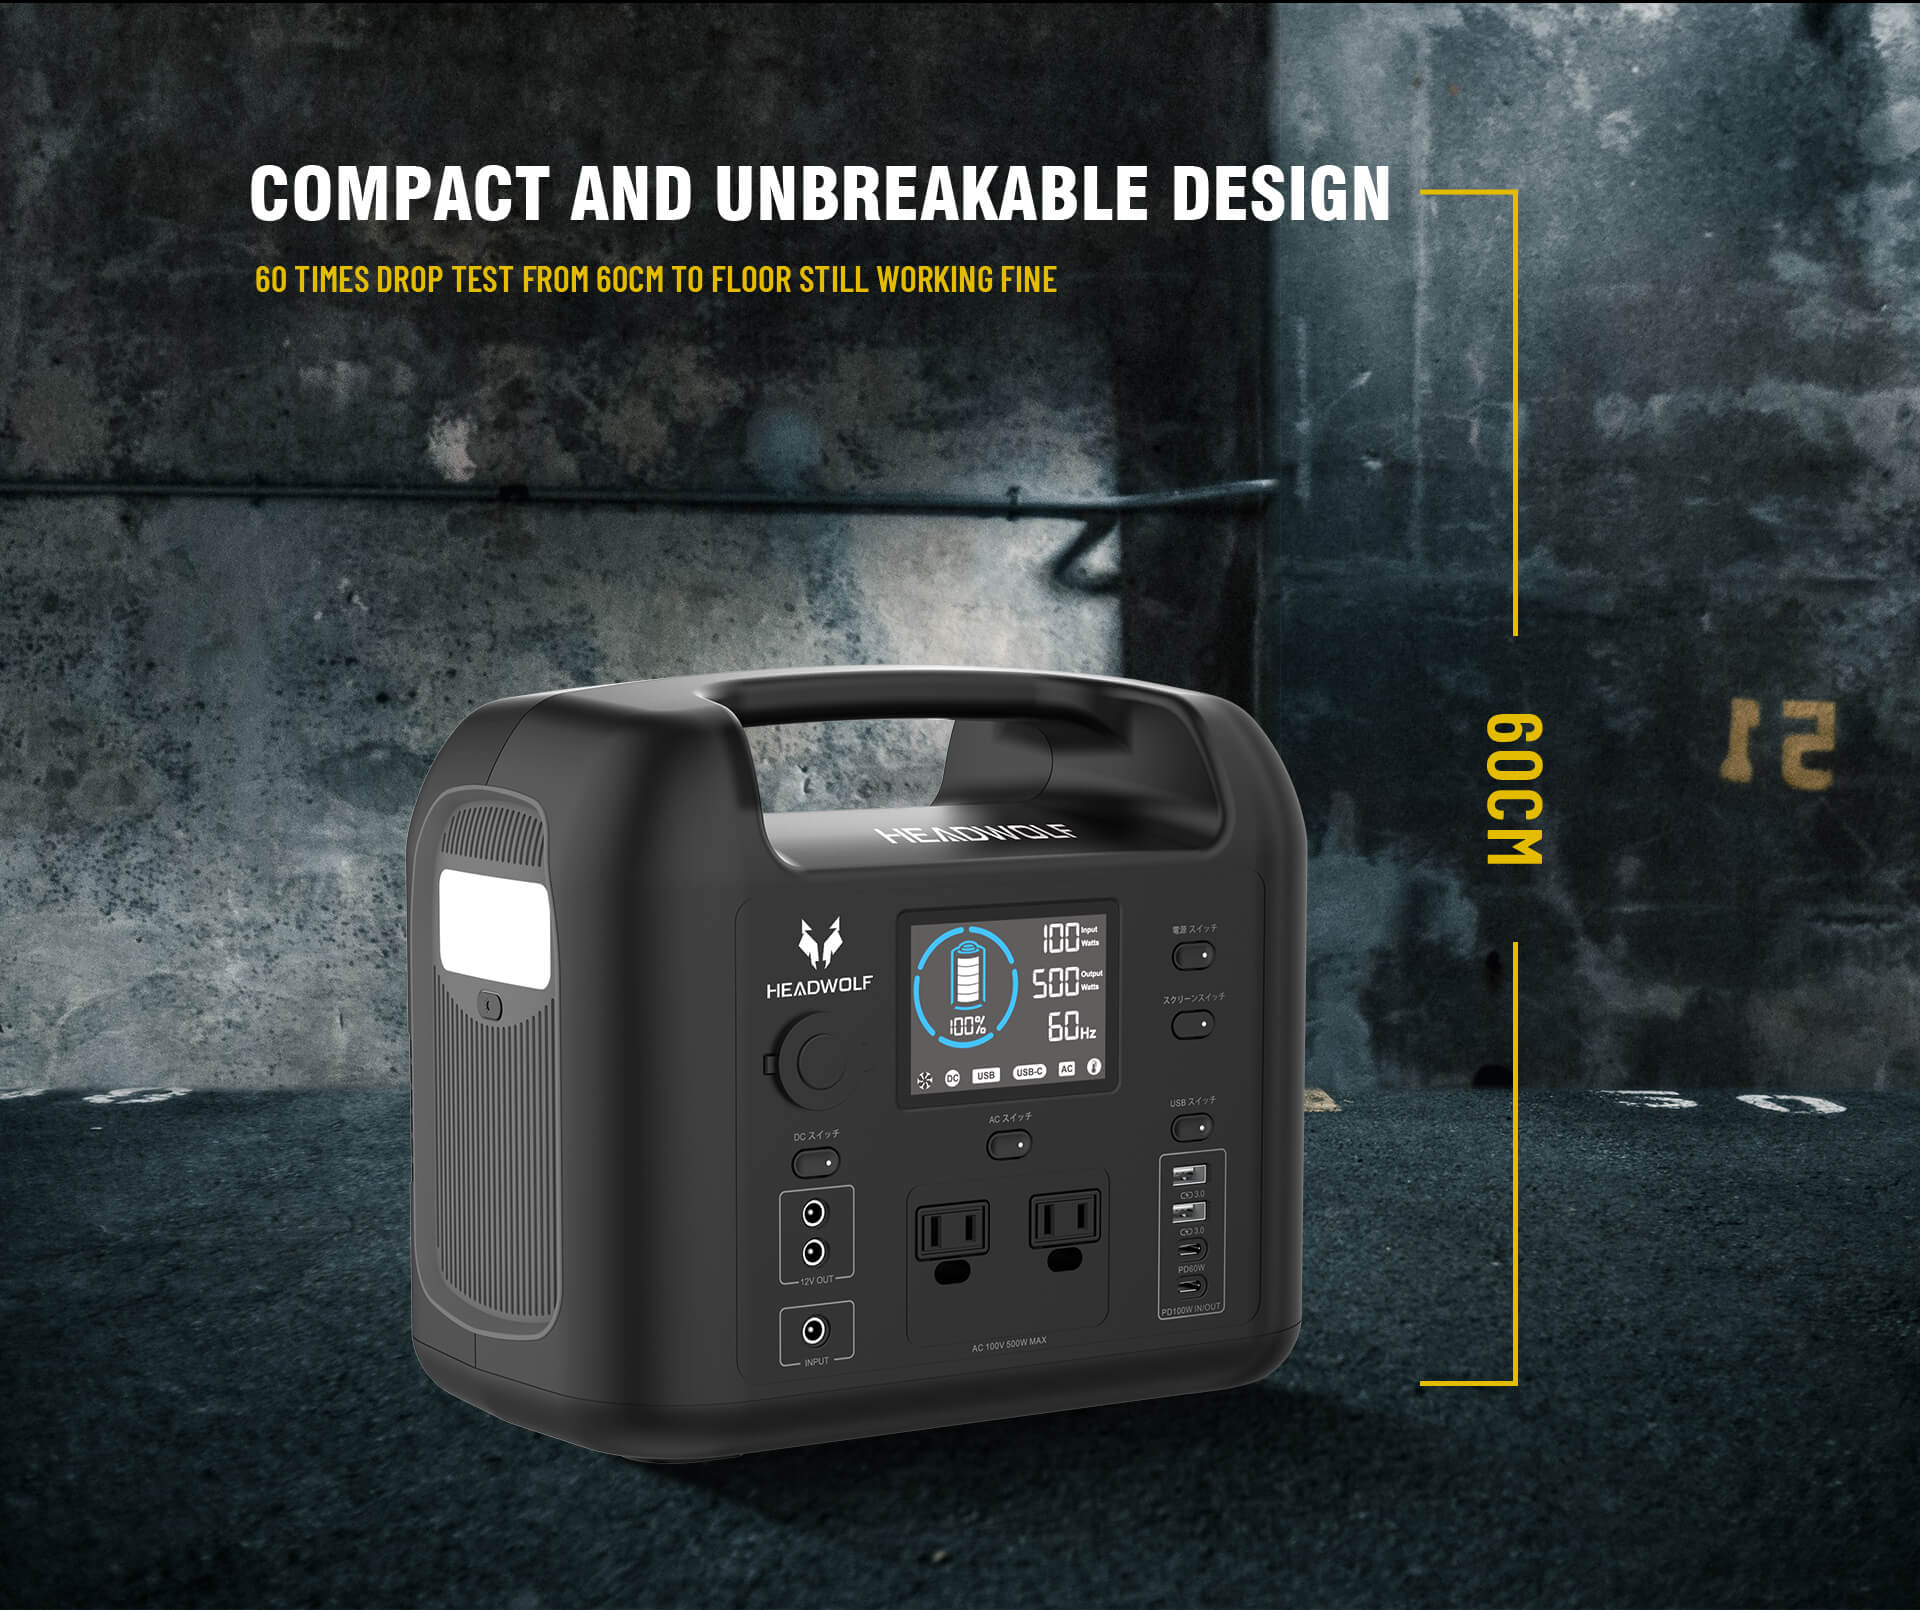 Compact and unbreakable design